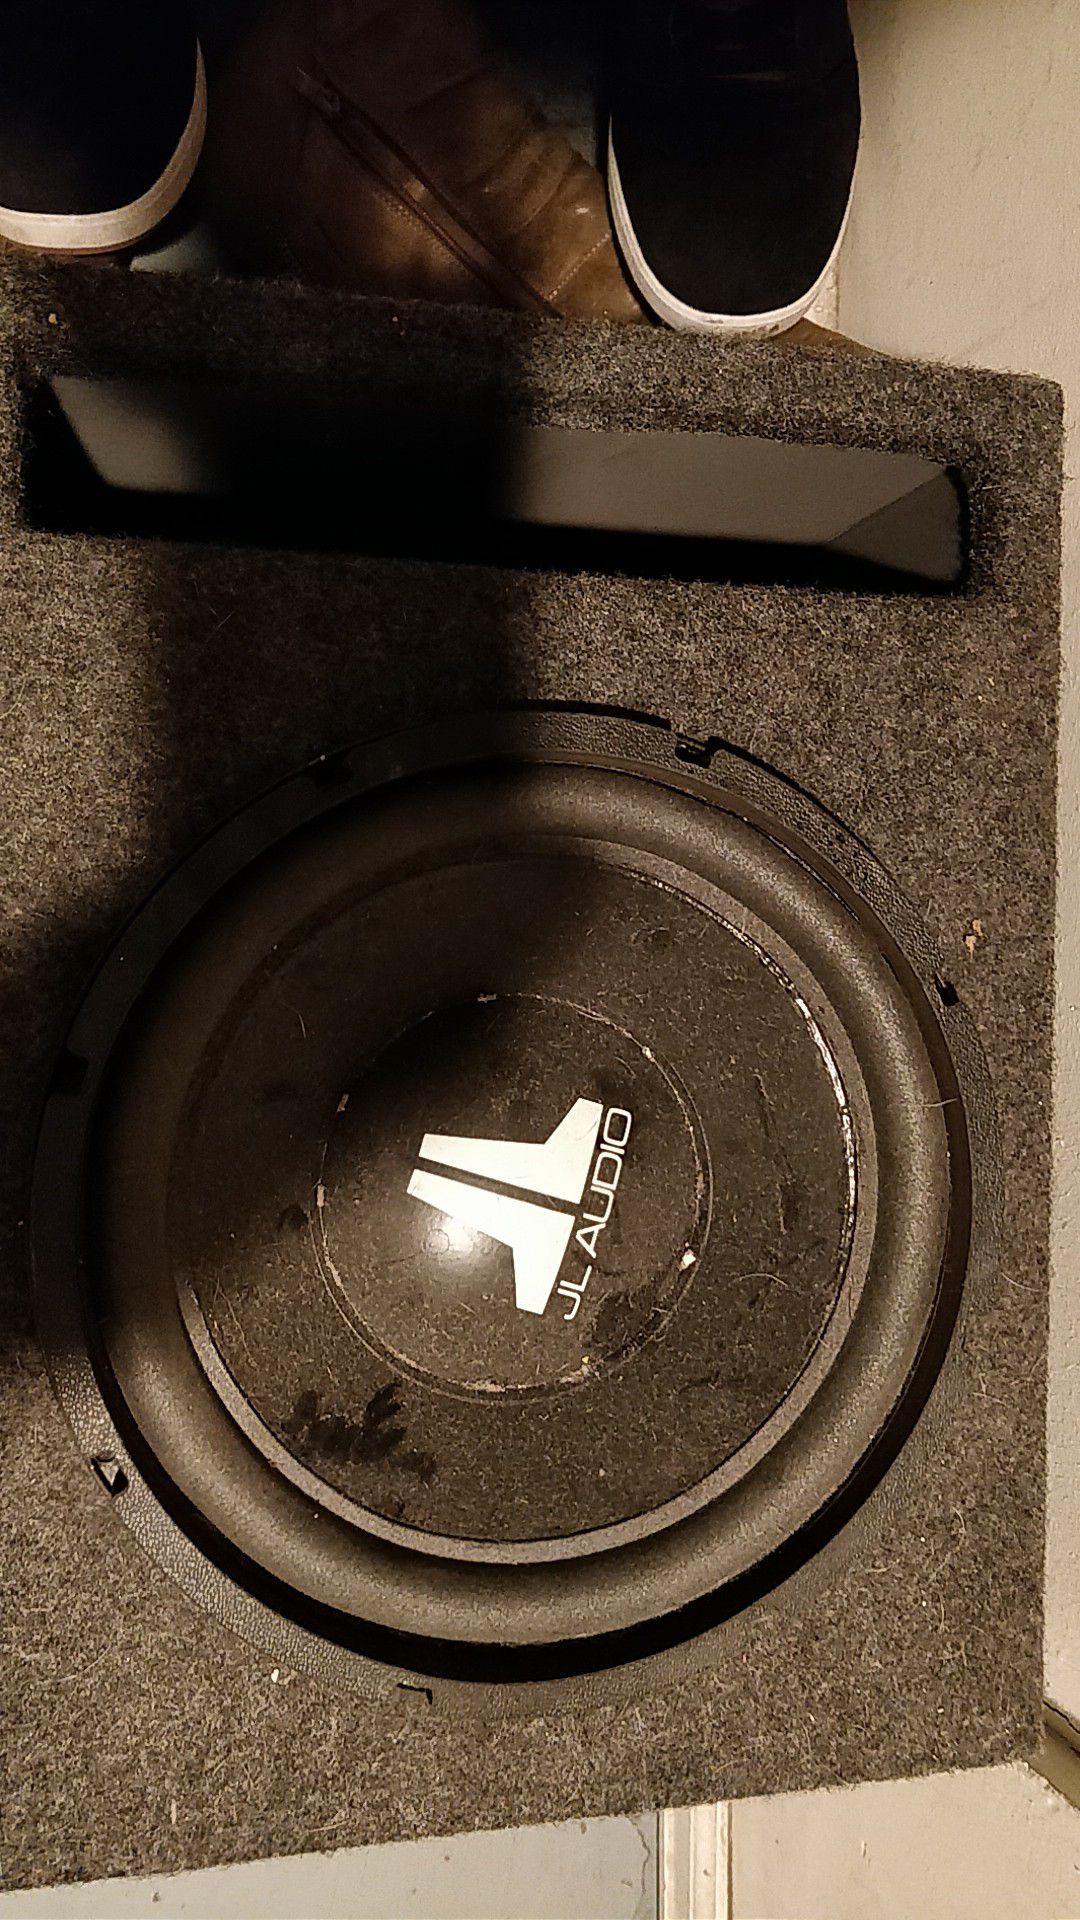 JL w3 subwoofer open to offers